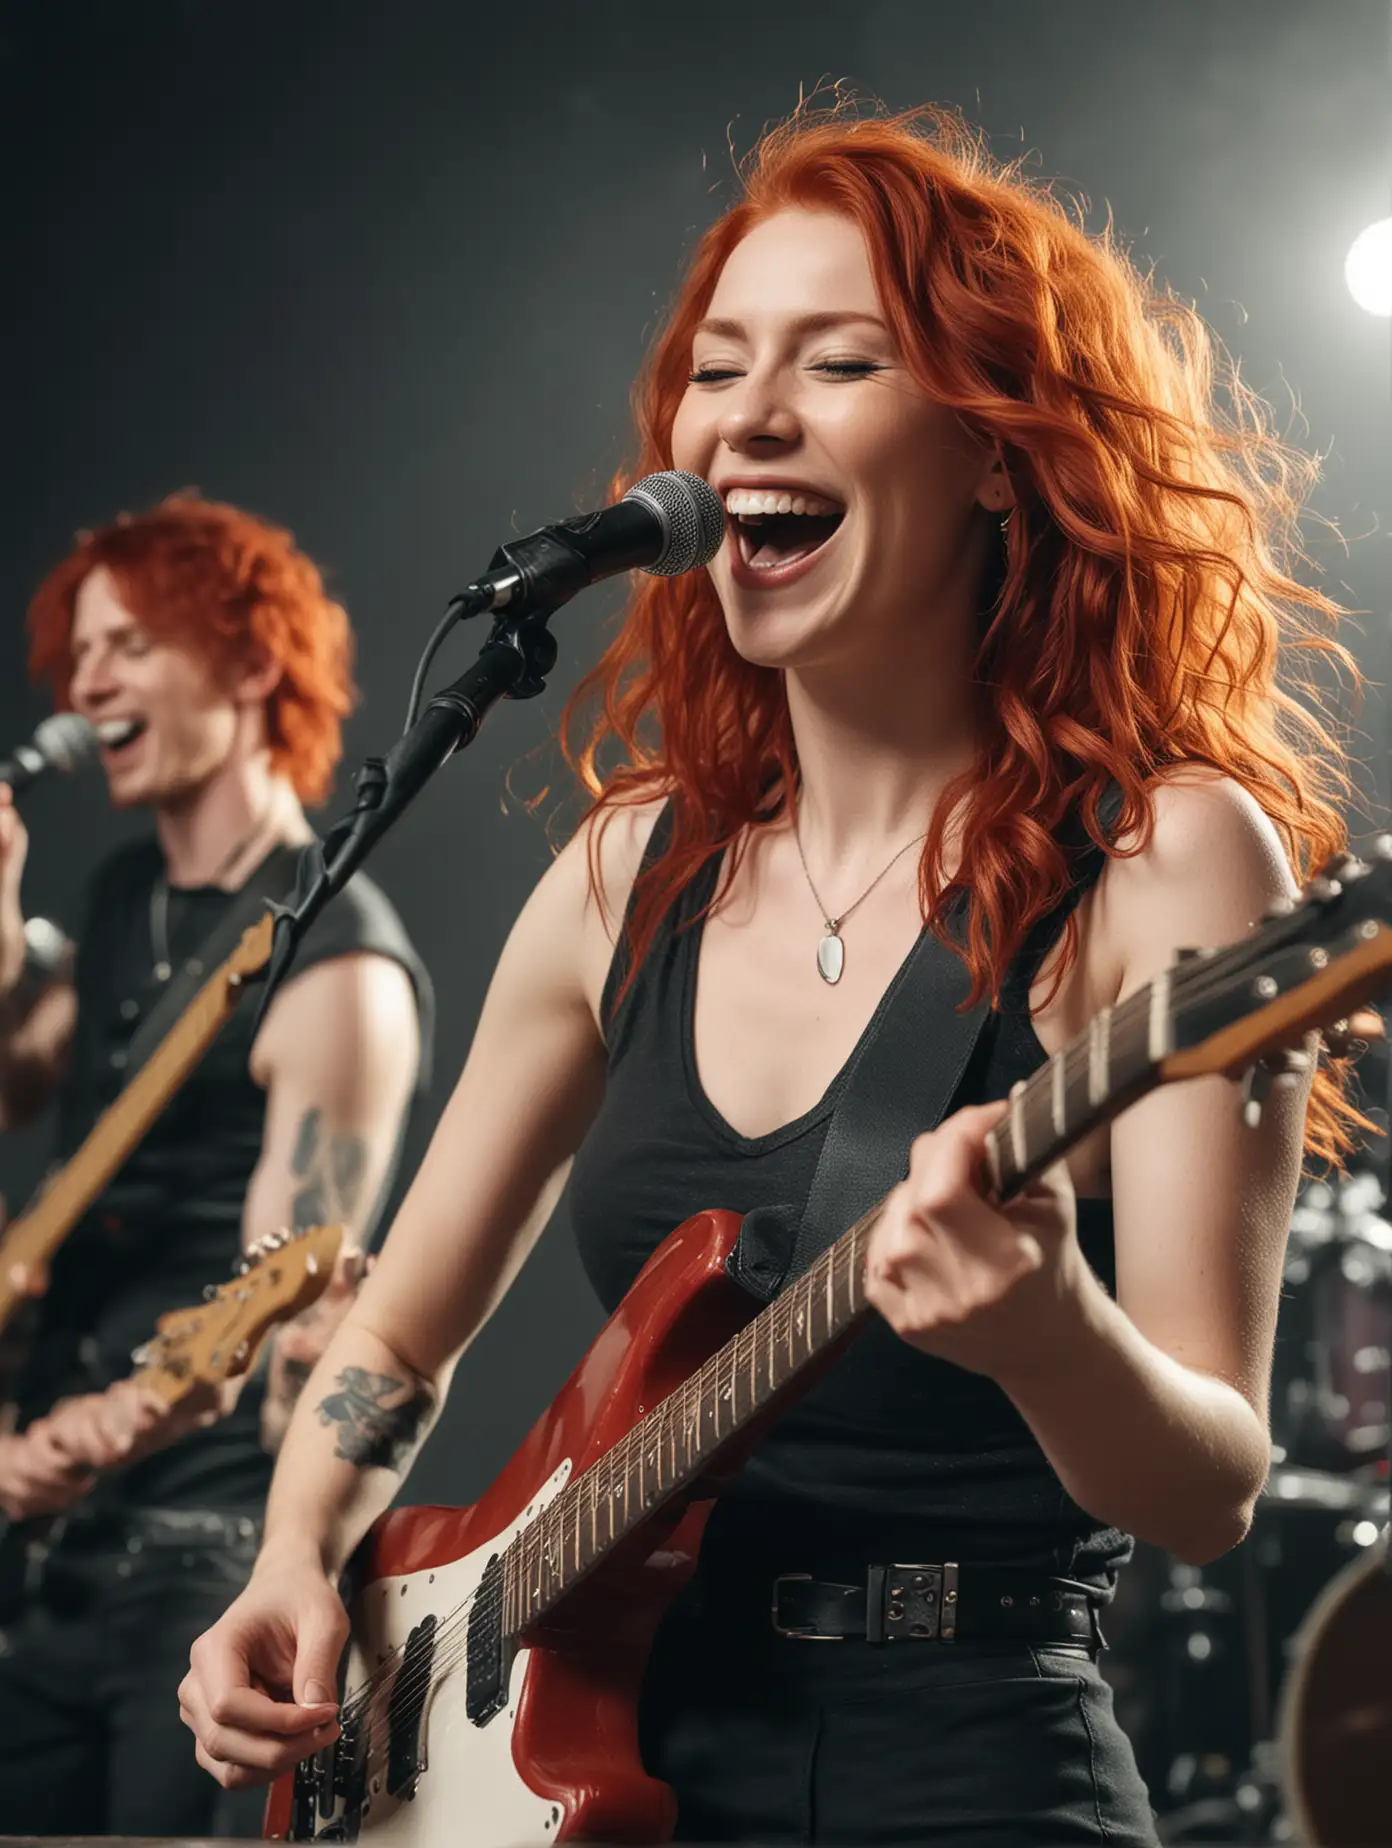 Energetic Rock Band Performance with RedHaired Female Guitarist